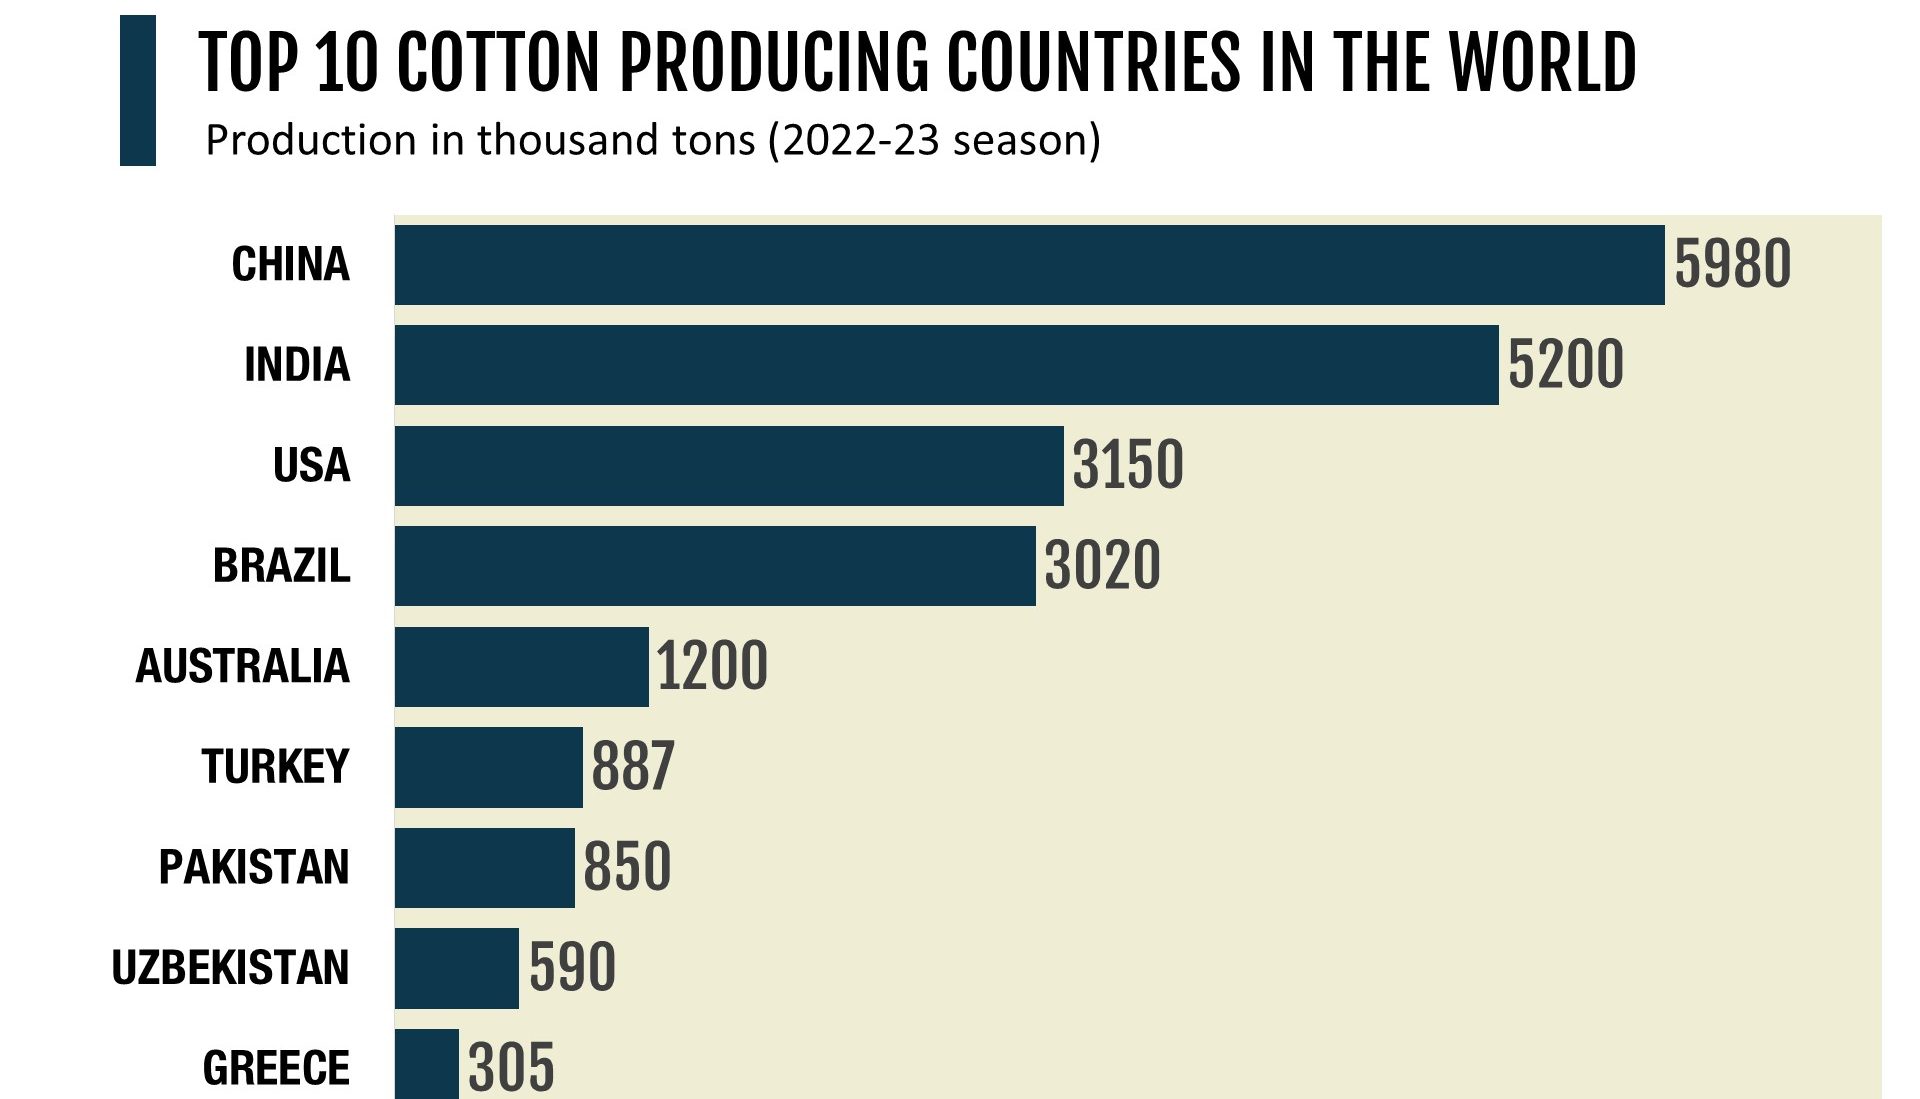 top 10 cotton producing countries in the world 2022-23